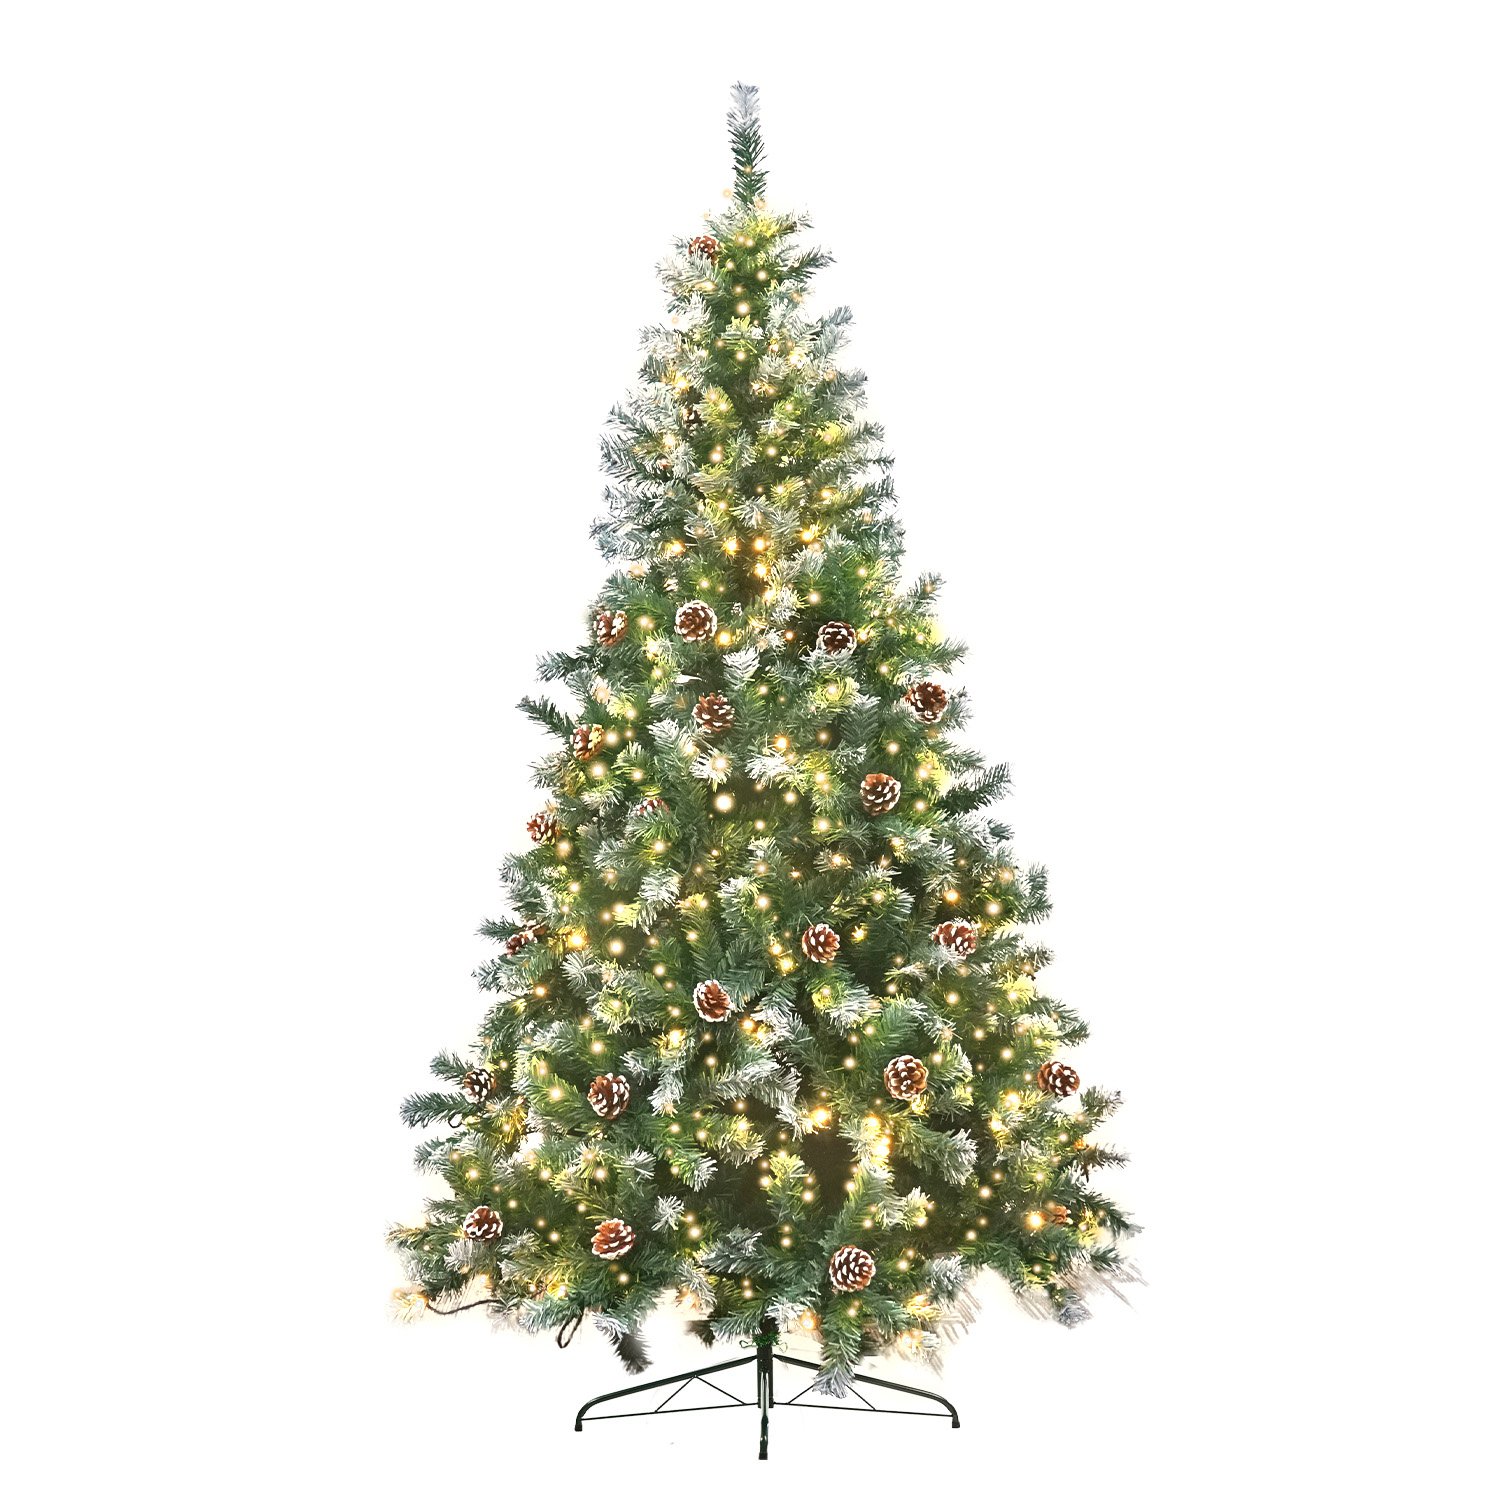 Christabelle 1.2m Pre Lit LED Christmas Tree with Pine Cones 1